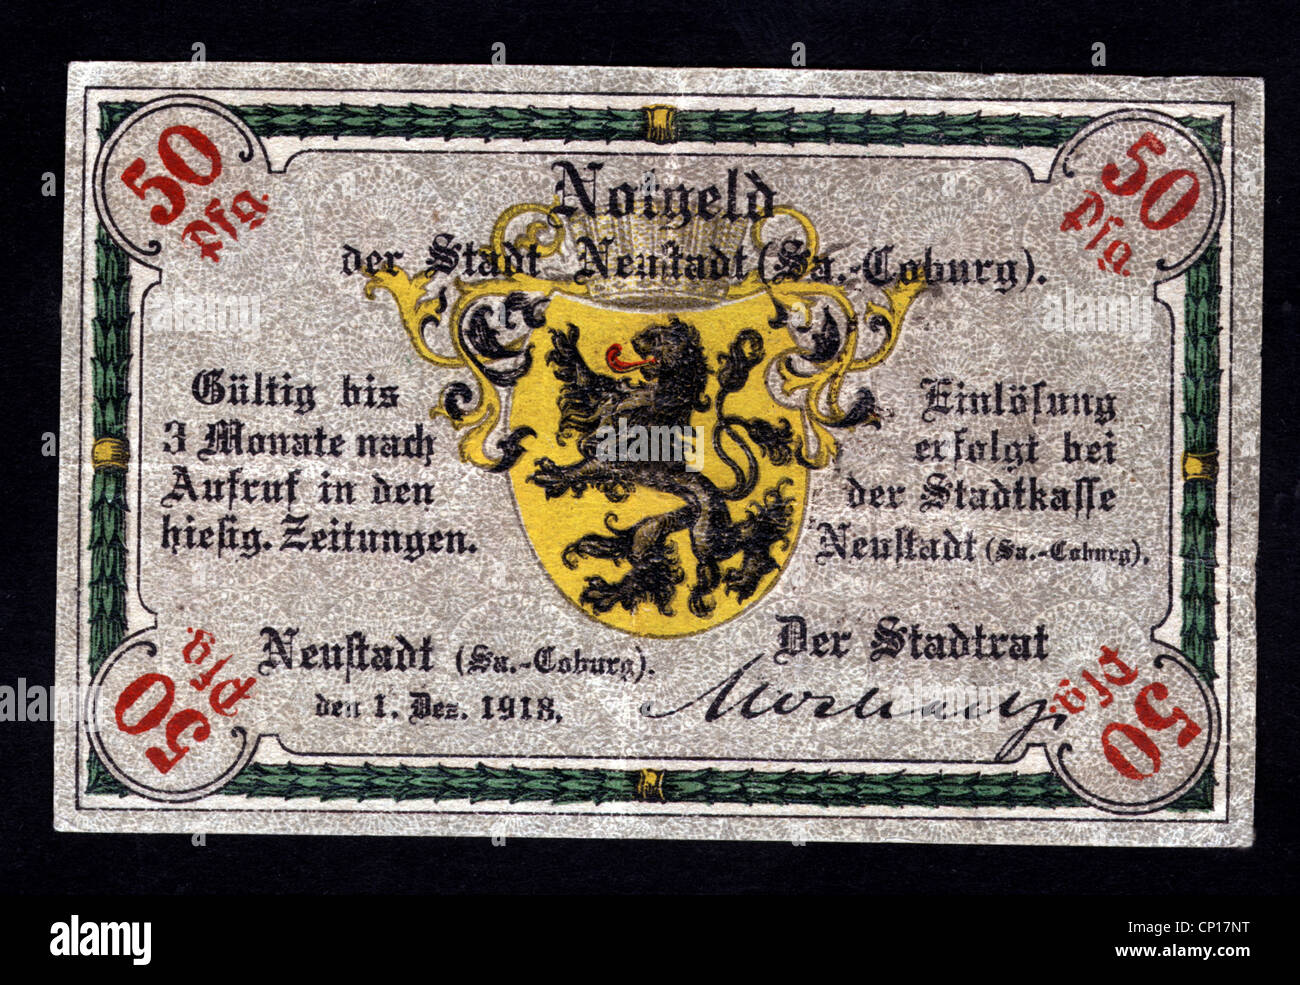 money / finance, bank notes, Germany, 50 Pfennig, emergency money of Neustadt (Saxony-Coburg), 1.12.1918, Additional-Rights-Clearences-Not Available Stock Photo